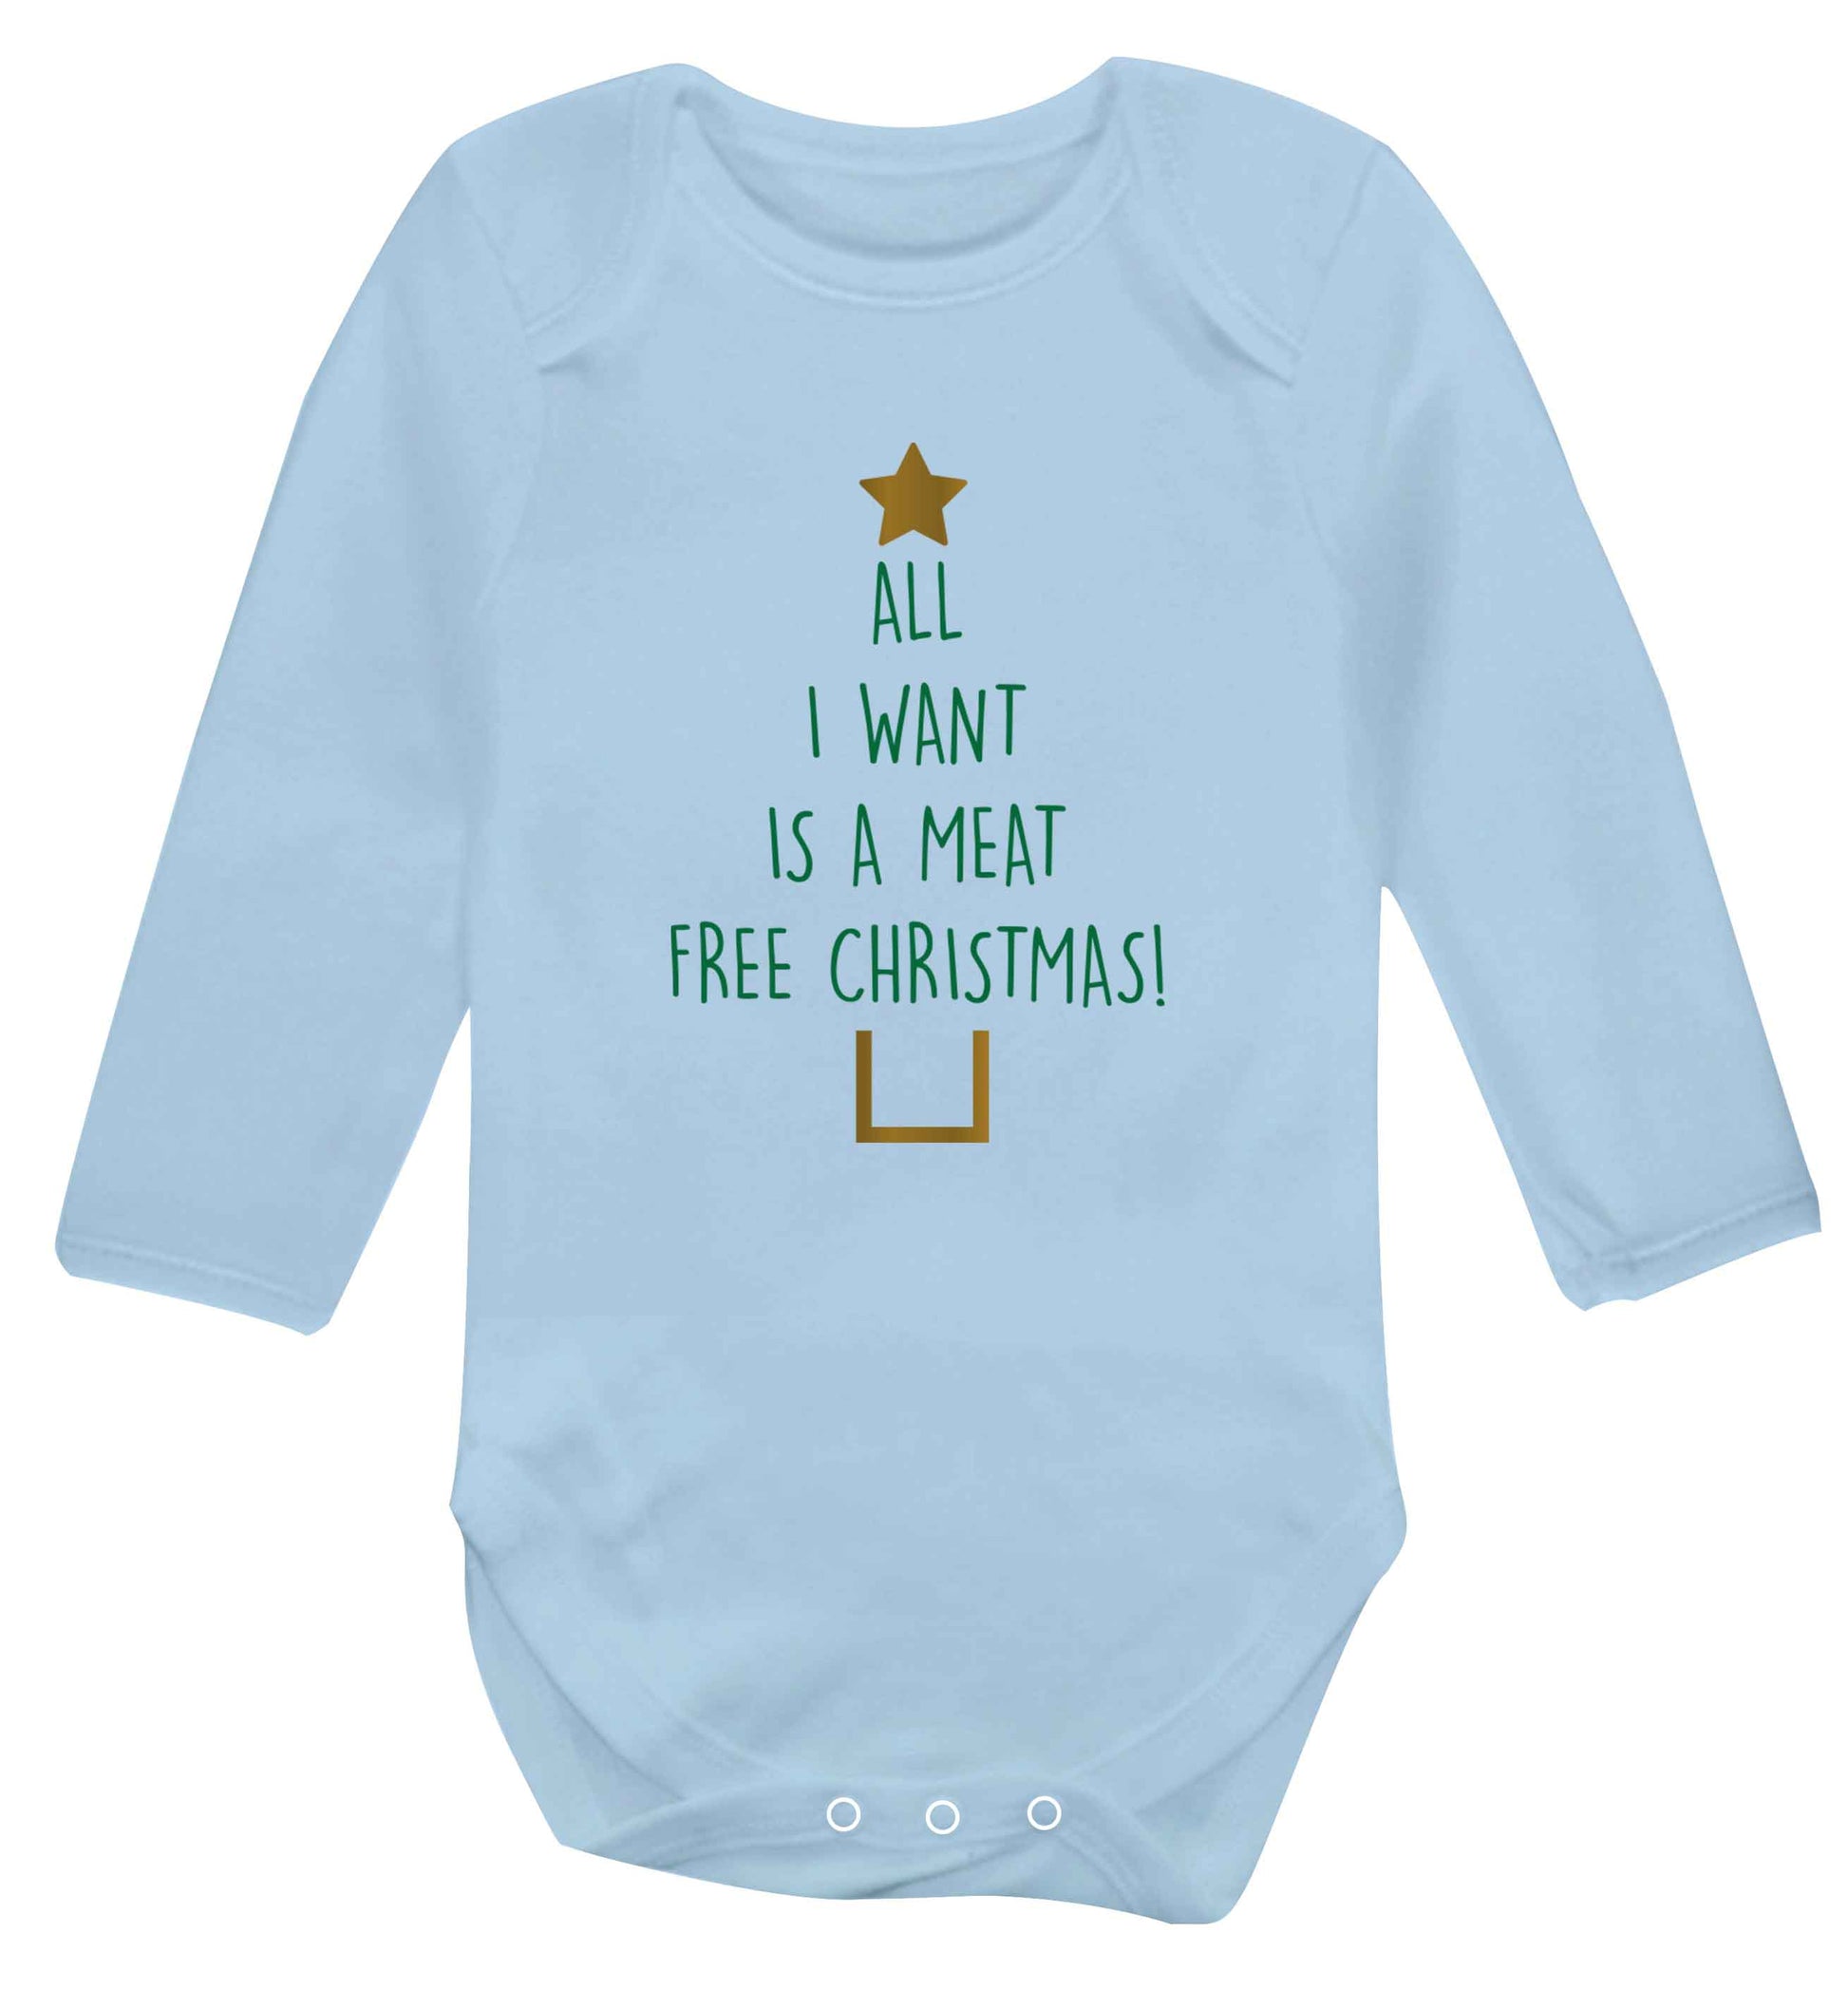 All I want is a meat free Christmas Baby Vest long sleeved pale blue 6-12 months